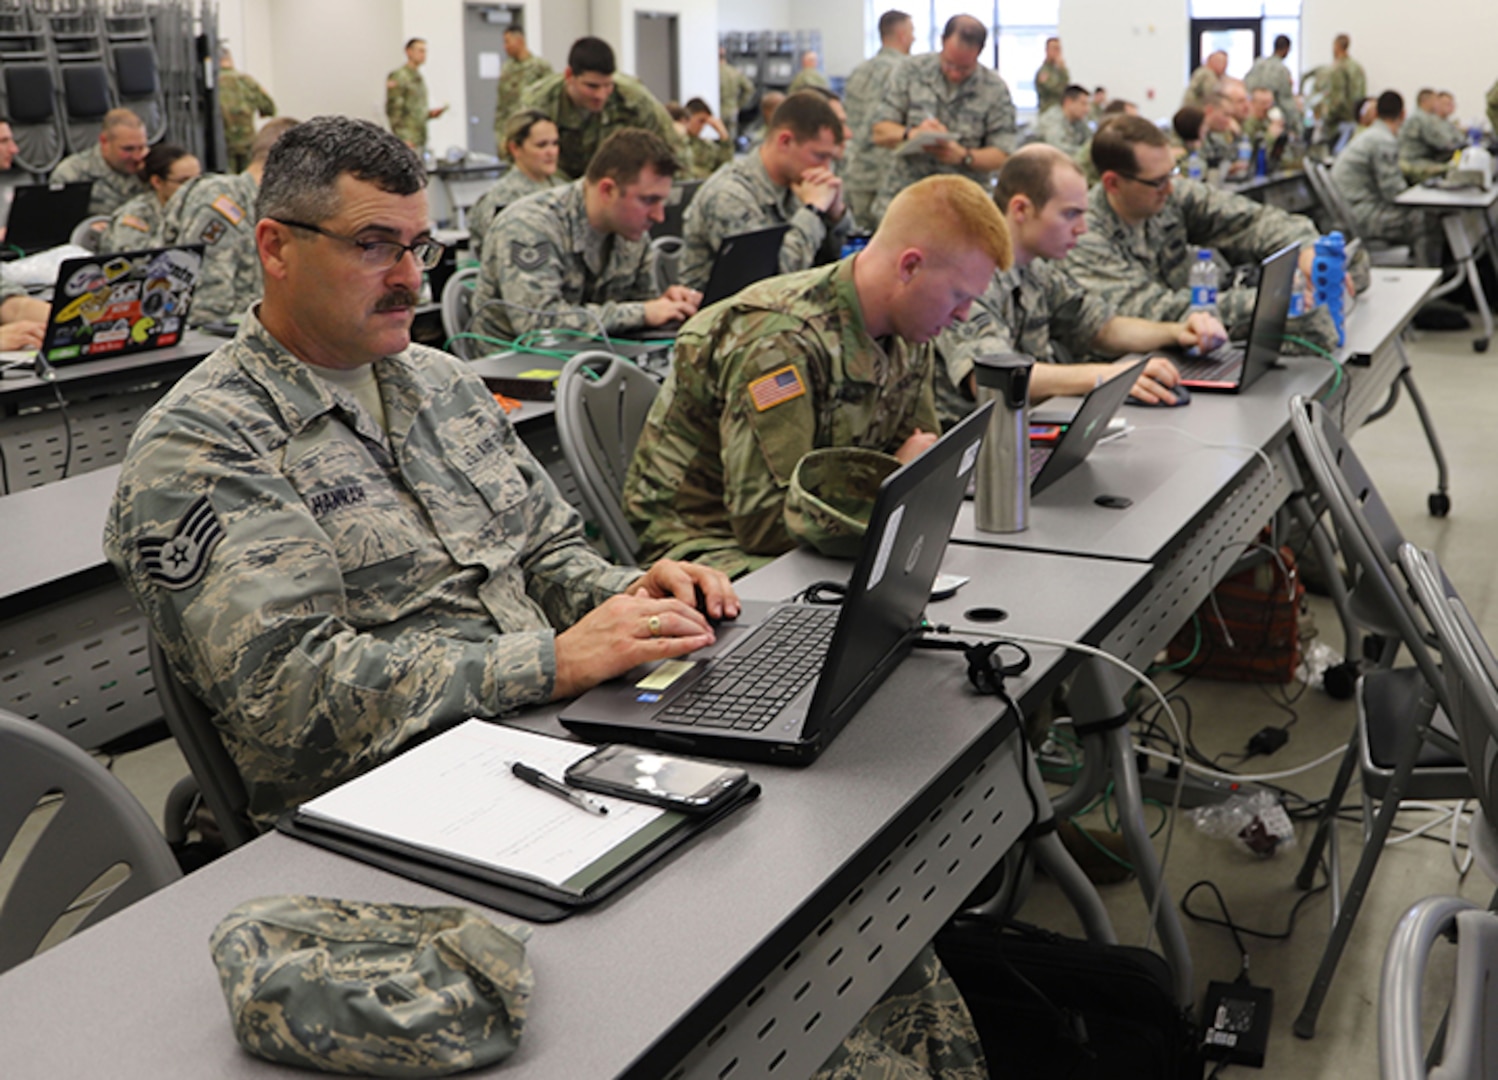 Soldiers and Airmen training with the Cyber Yankee 2018 exercise prepare counter cyber-attacks to scenarios given them during the exercise at Joint Base Cape Cod, Mass.